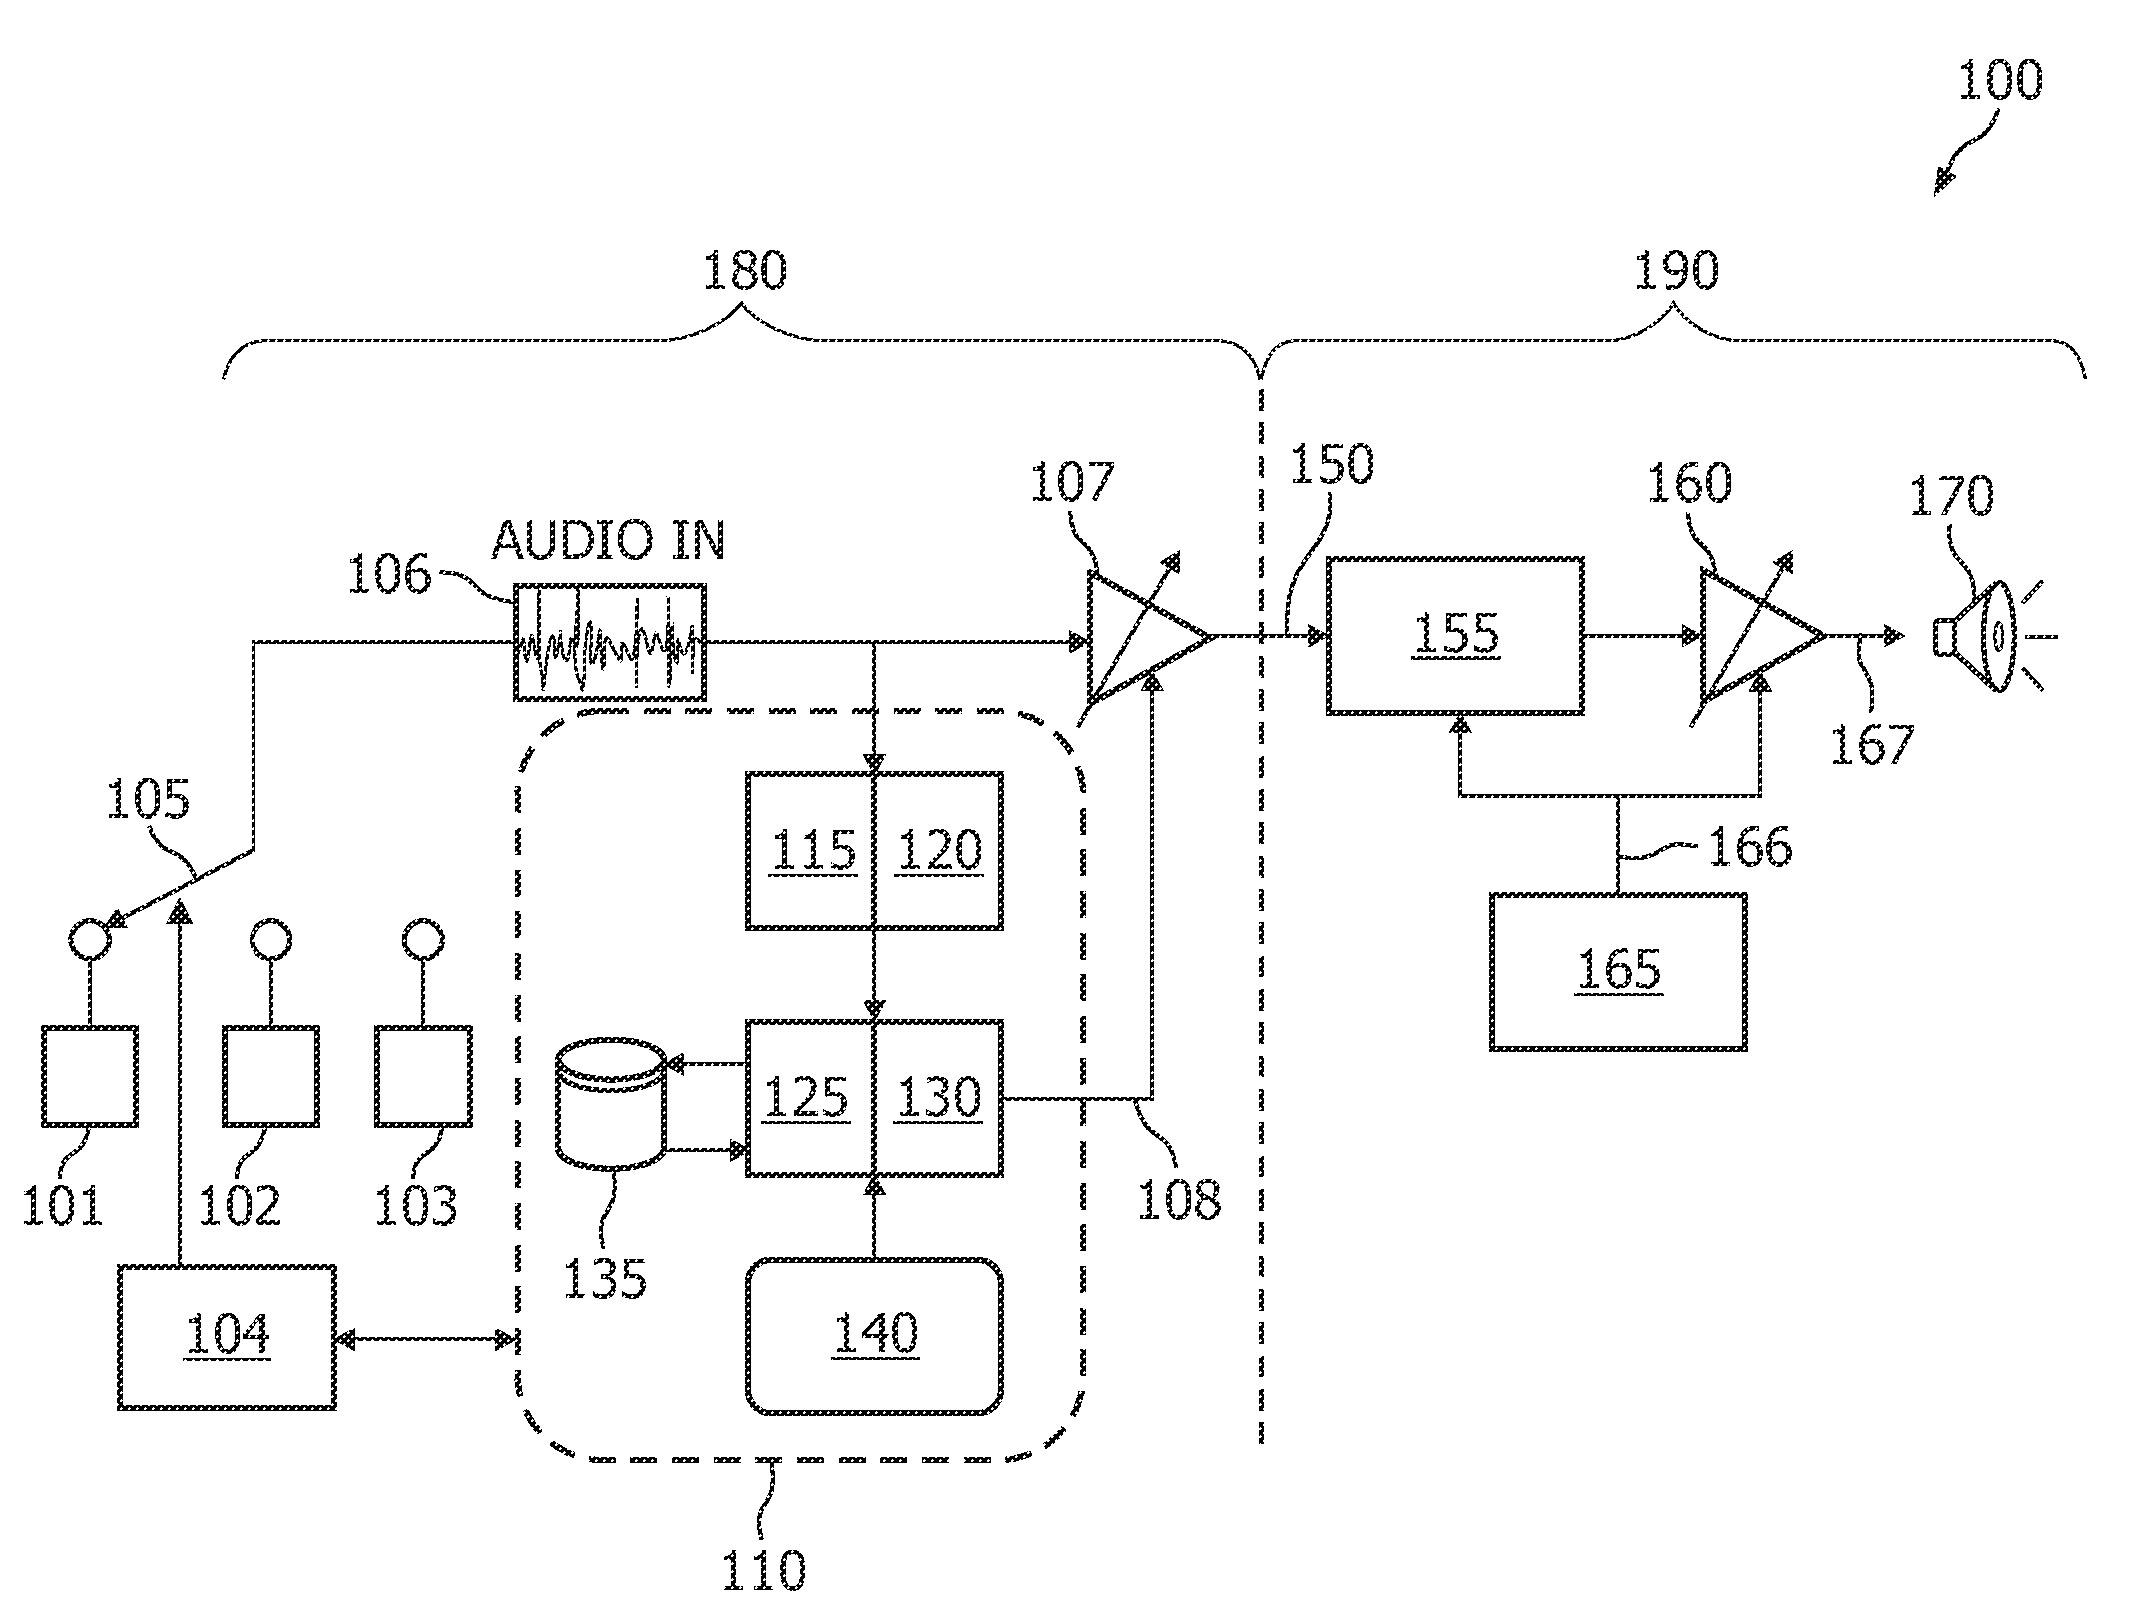 System for processing audio data